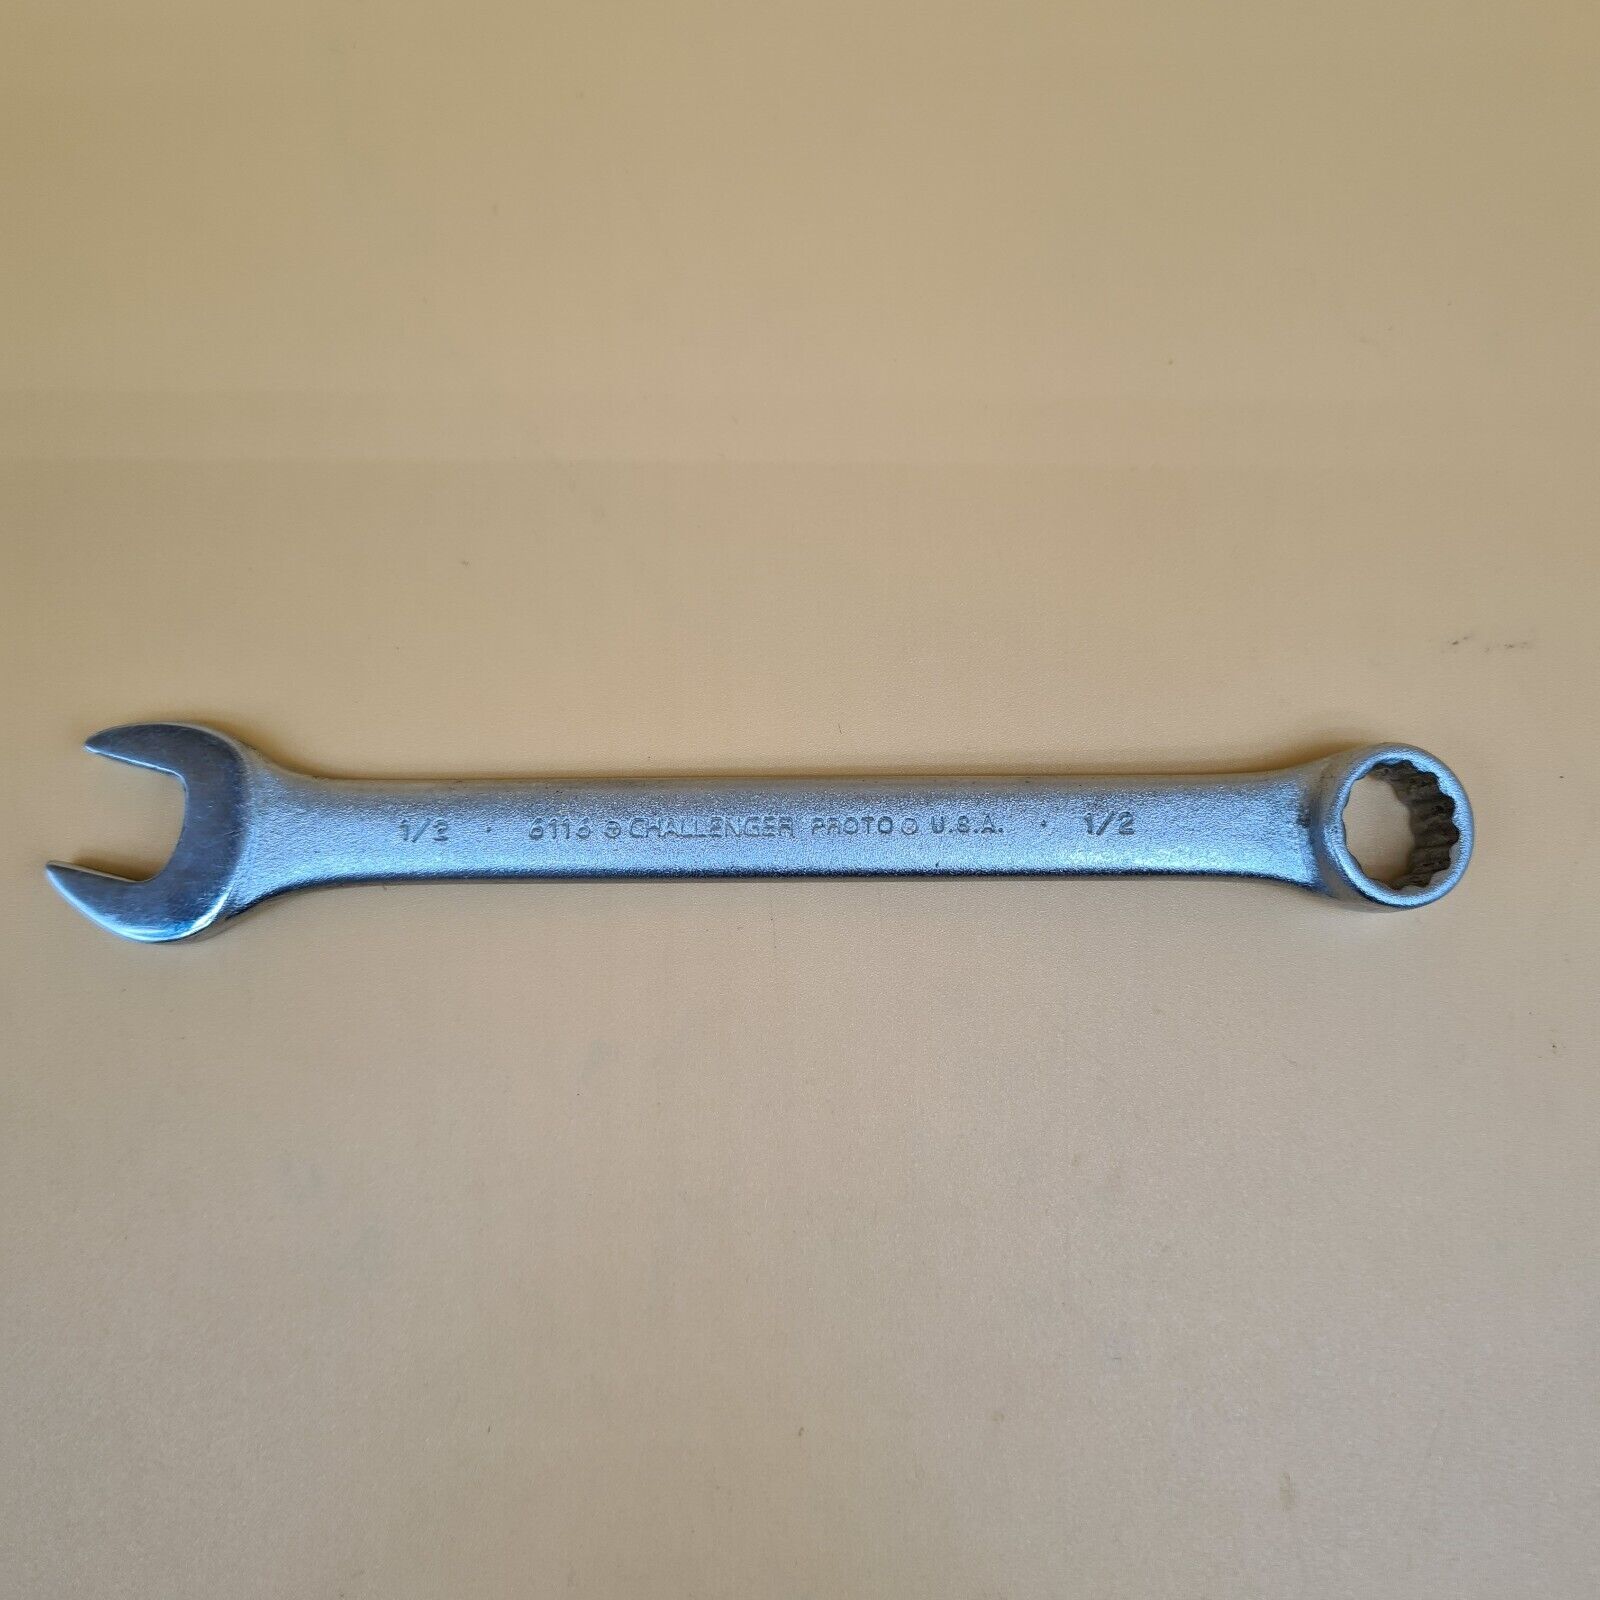 Proto Challenger genuine replacement wrenches 1/2 7/16 3/8 5/16